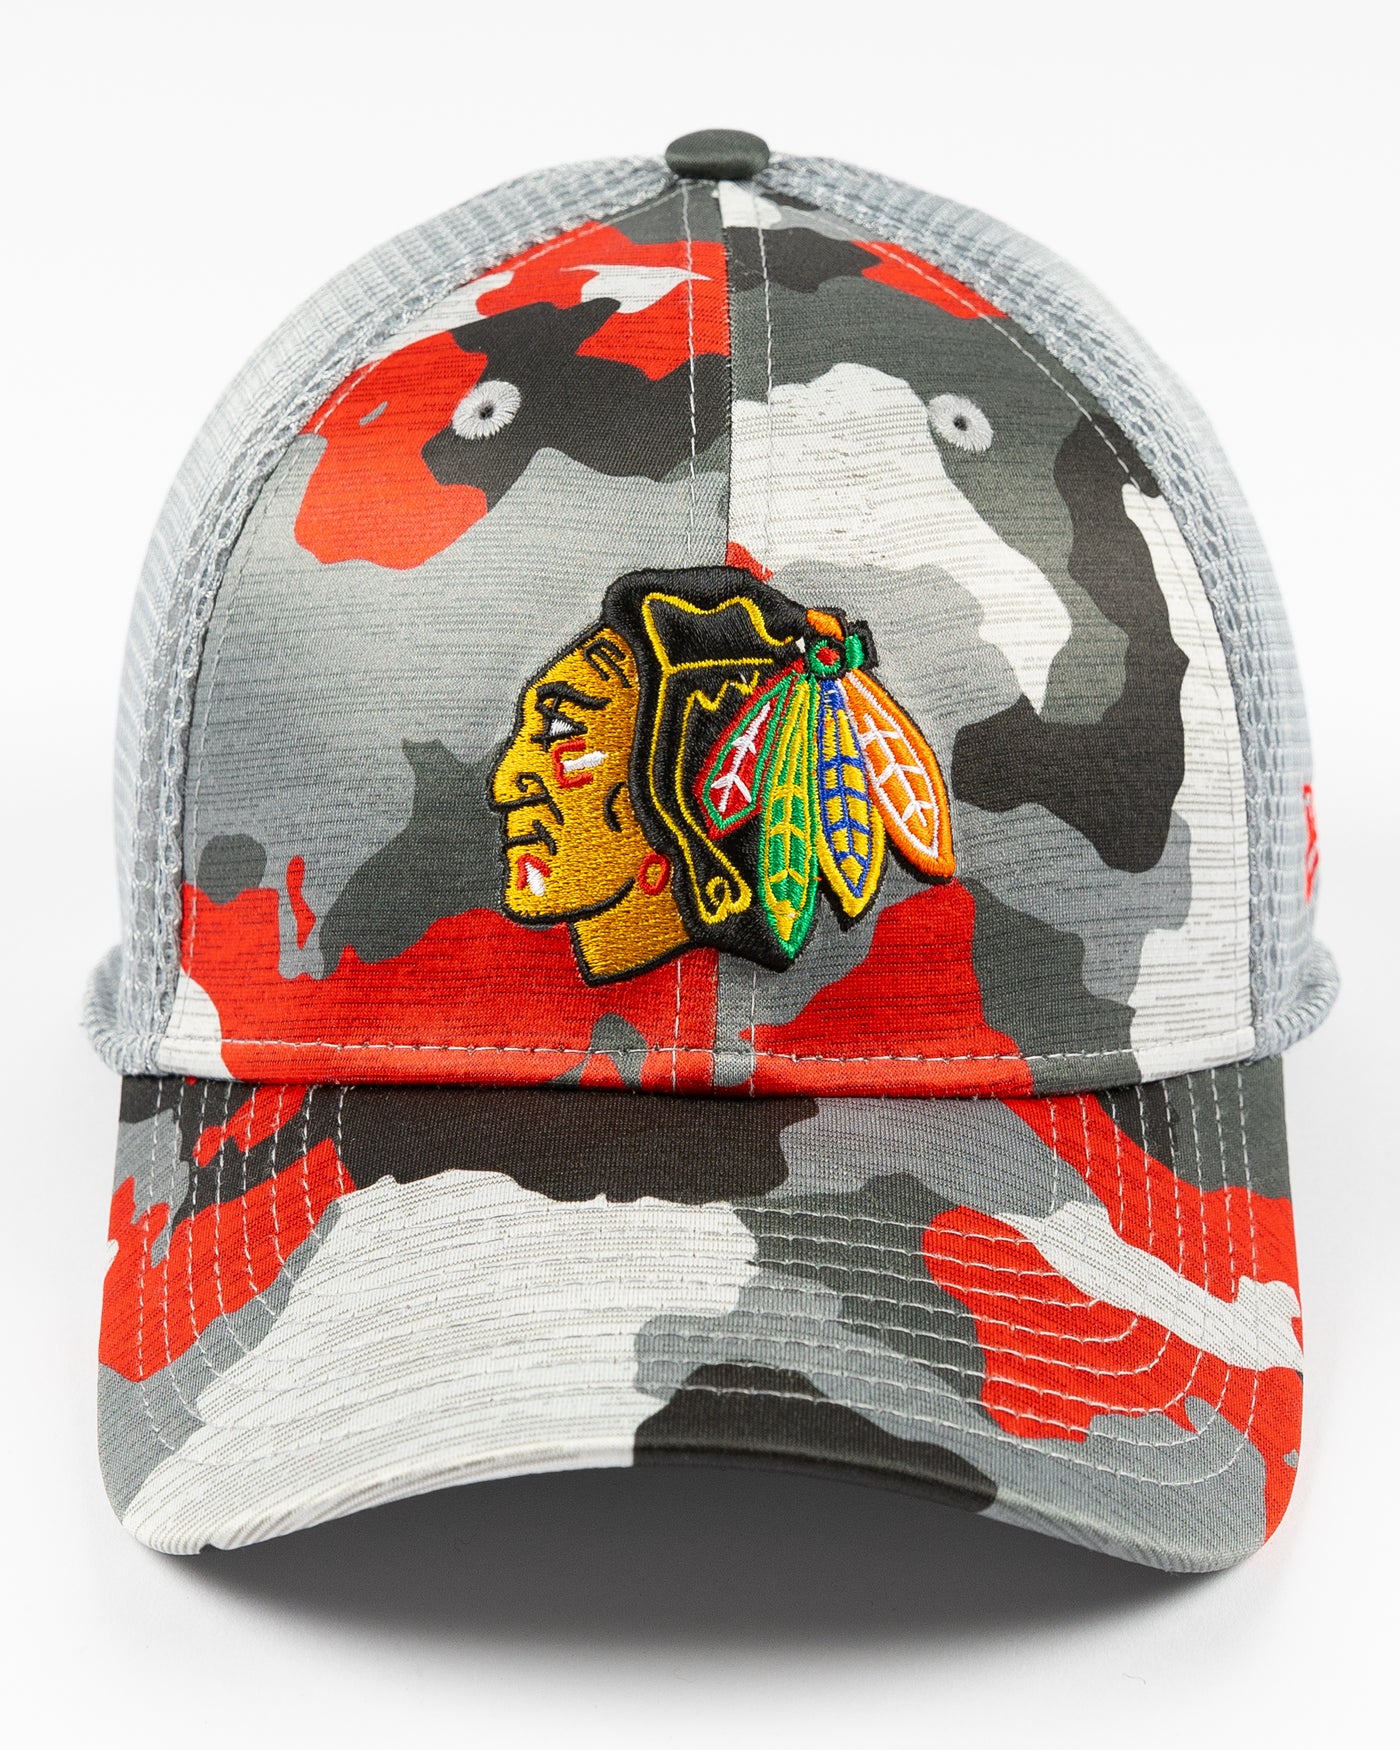 New Era 39THIRTY black, grey and red camo fitted cap with embroidered Chicago Blackhawks primary logo on front - front lay flat